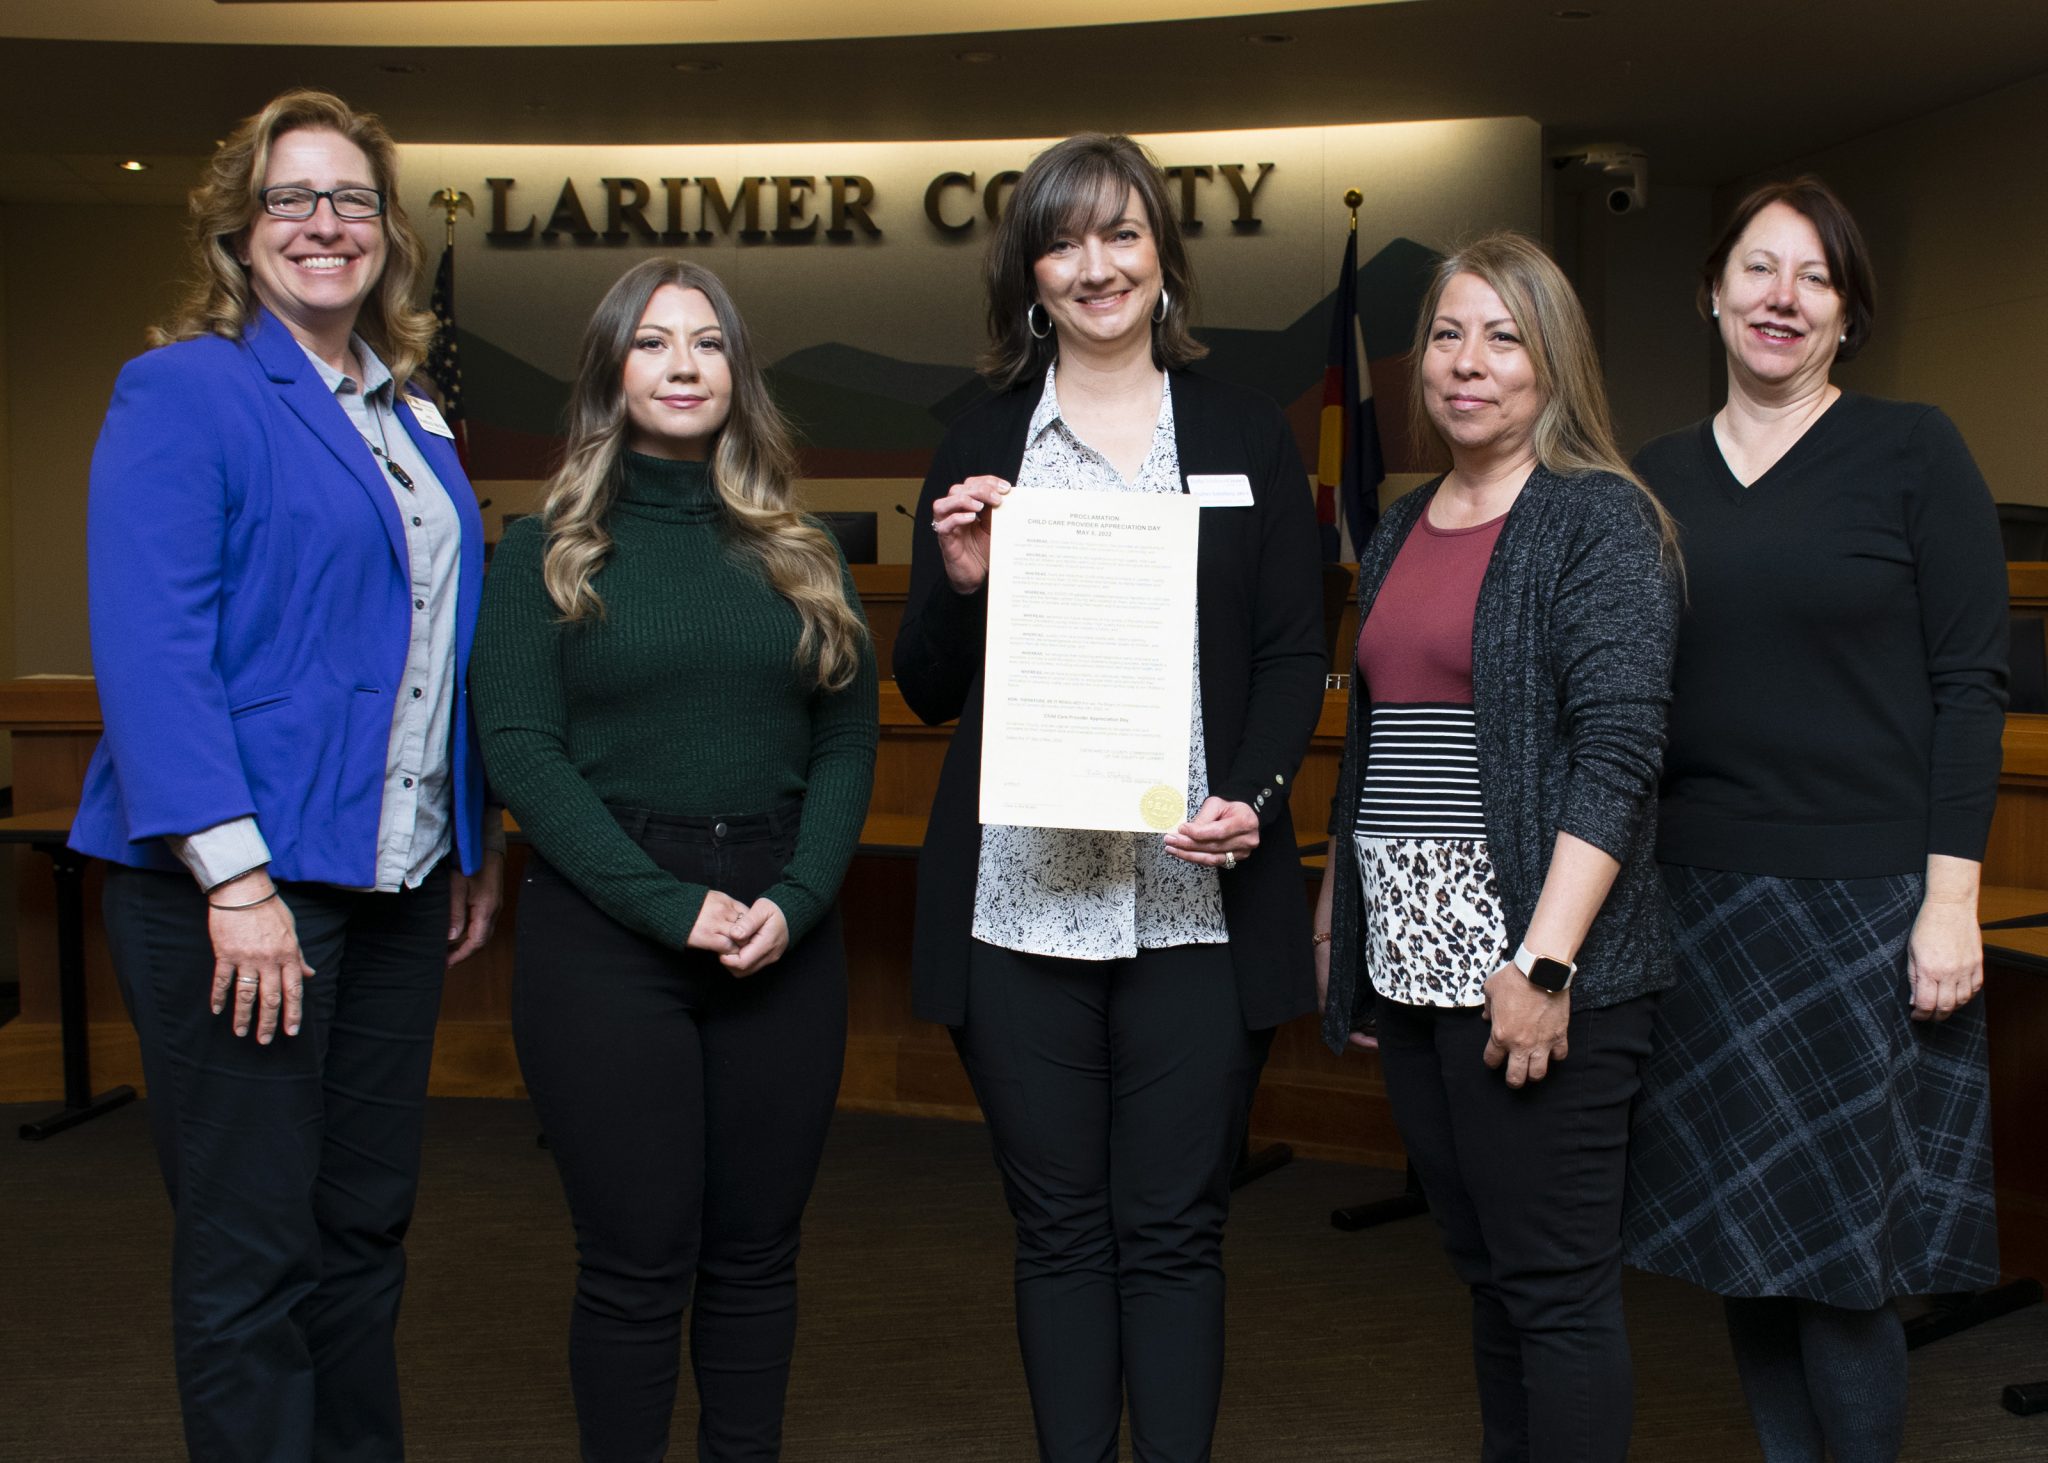 Larimer County Commissioners proclaim May 6, 2022 as Larimer County